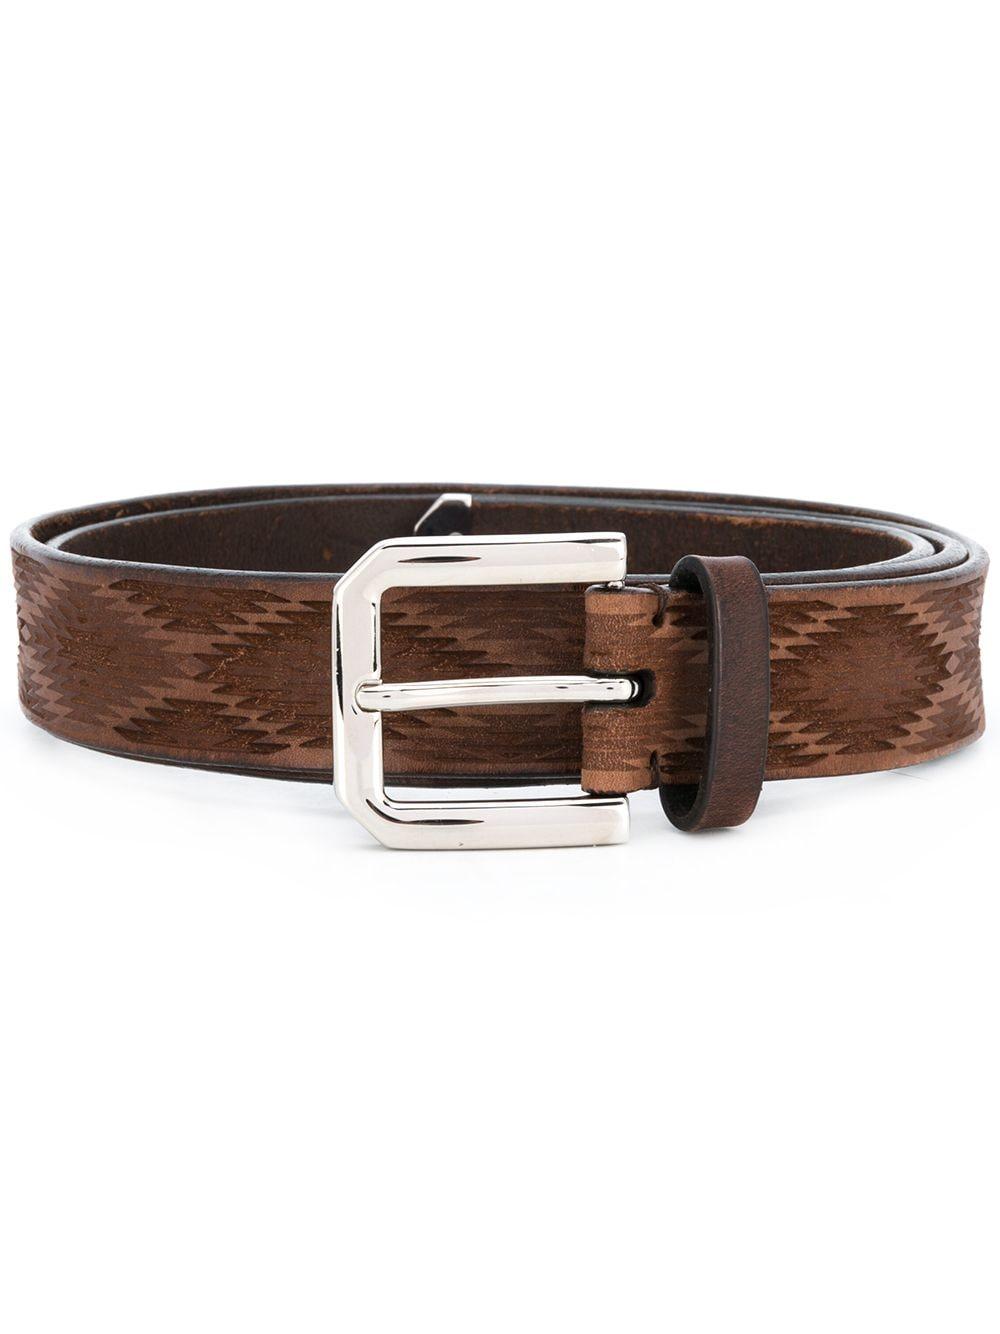 Brunello Cucinelli Carved Leather Belt in Brown for Men - Lyst